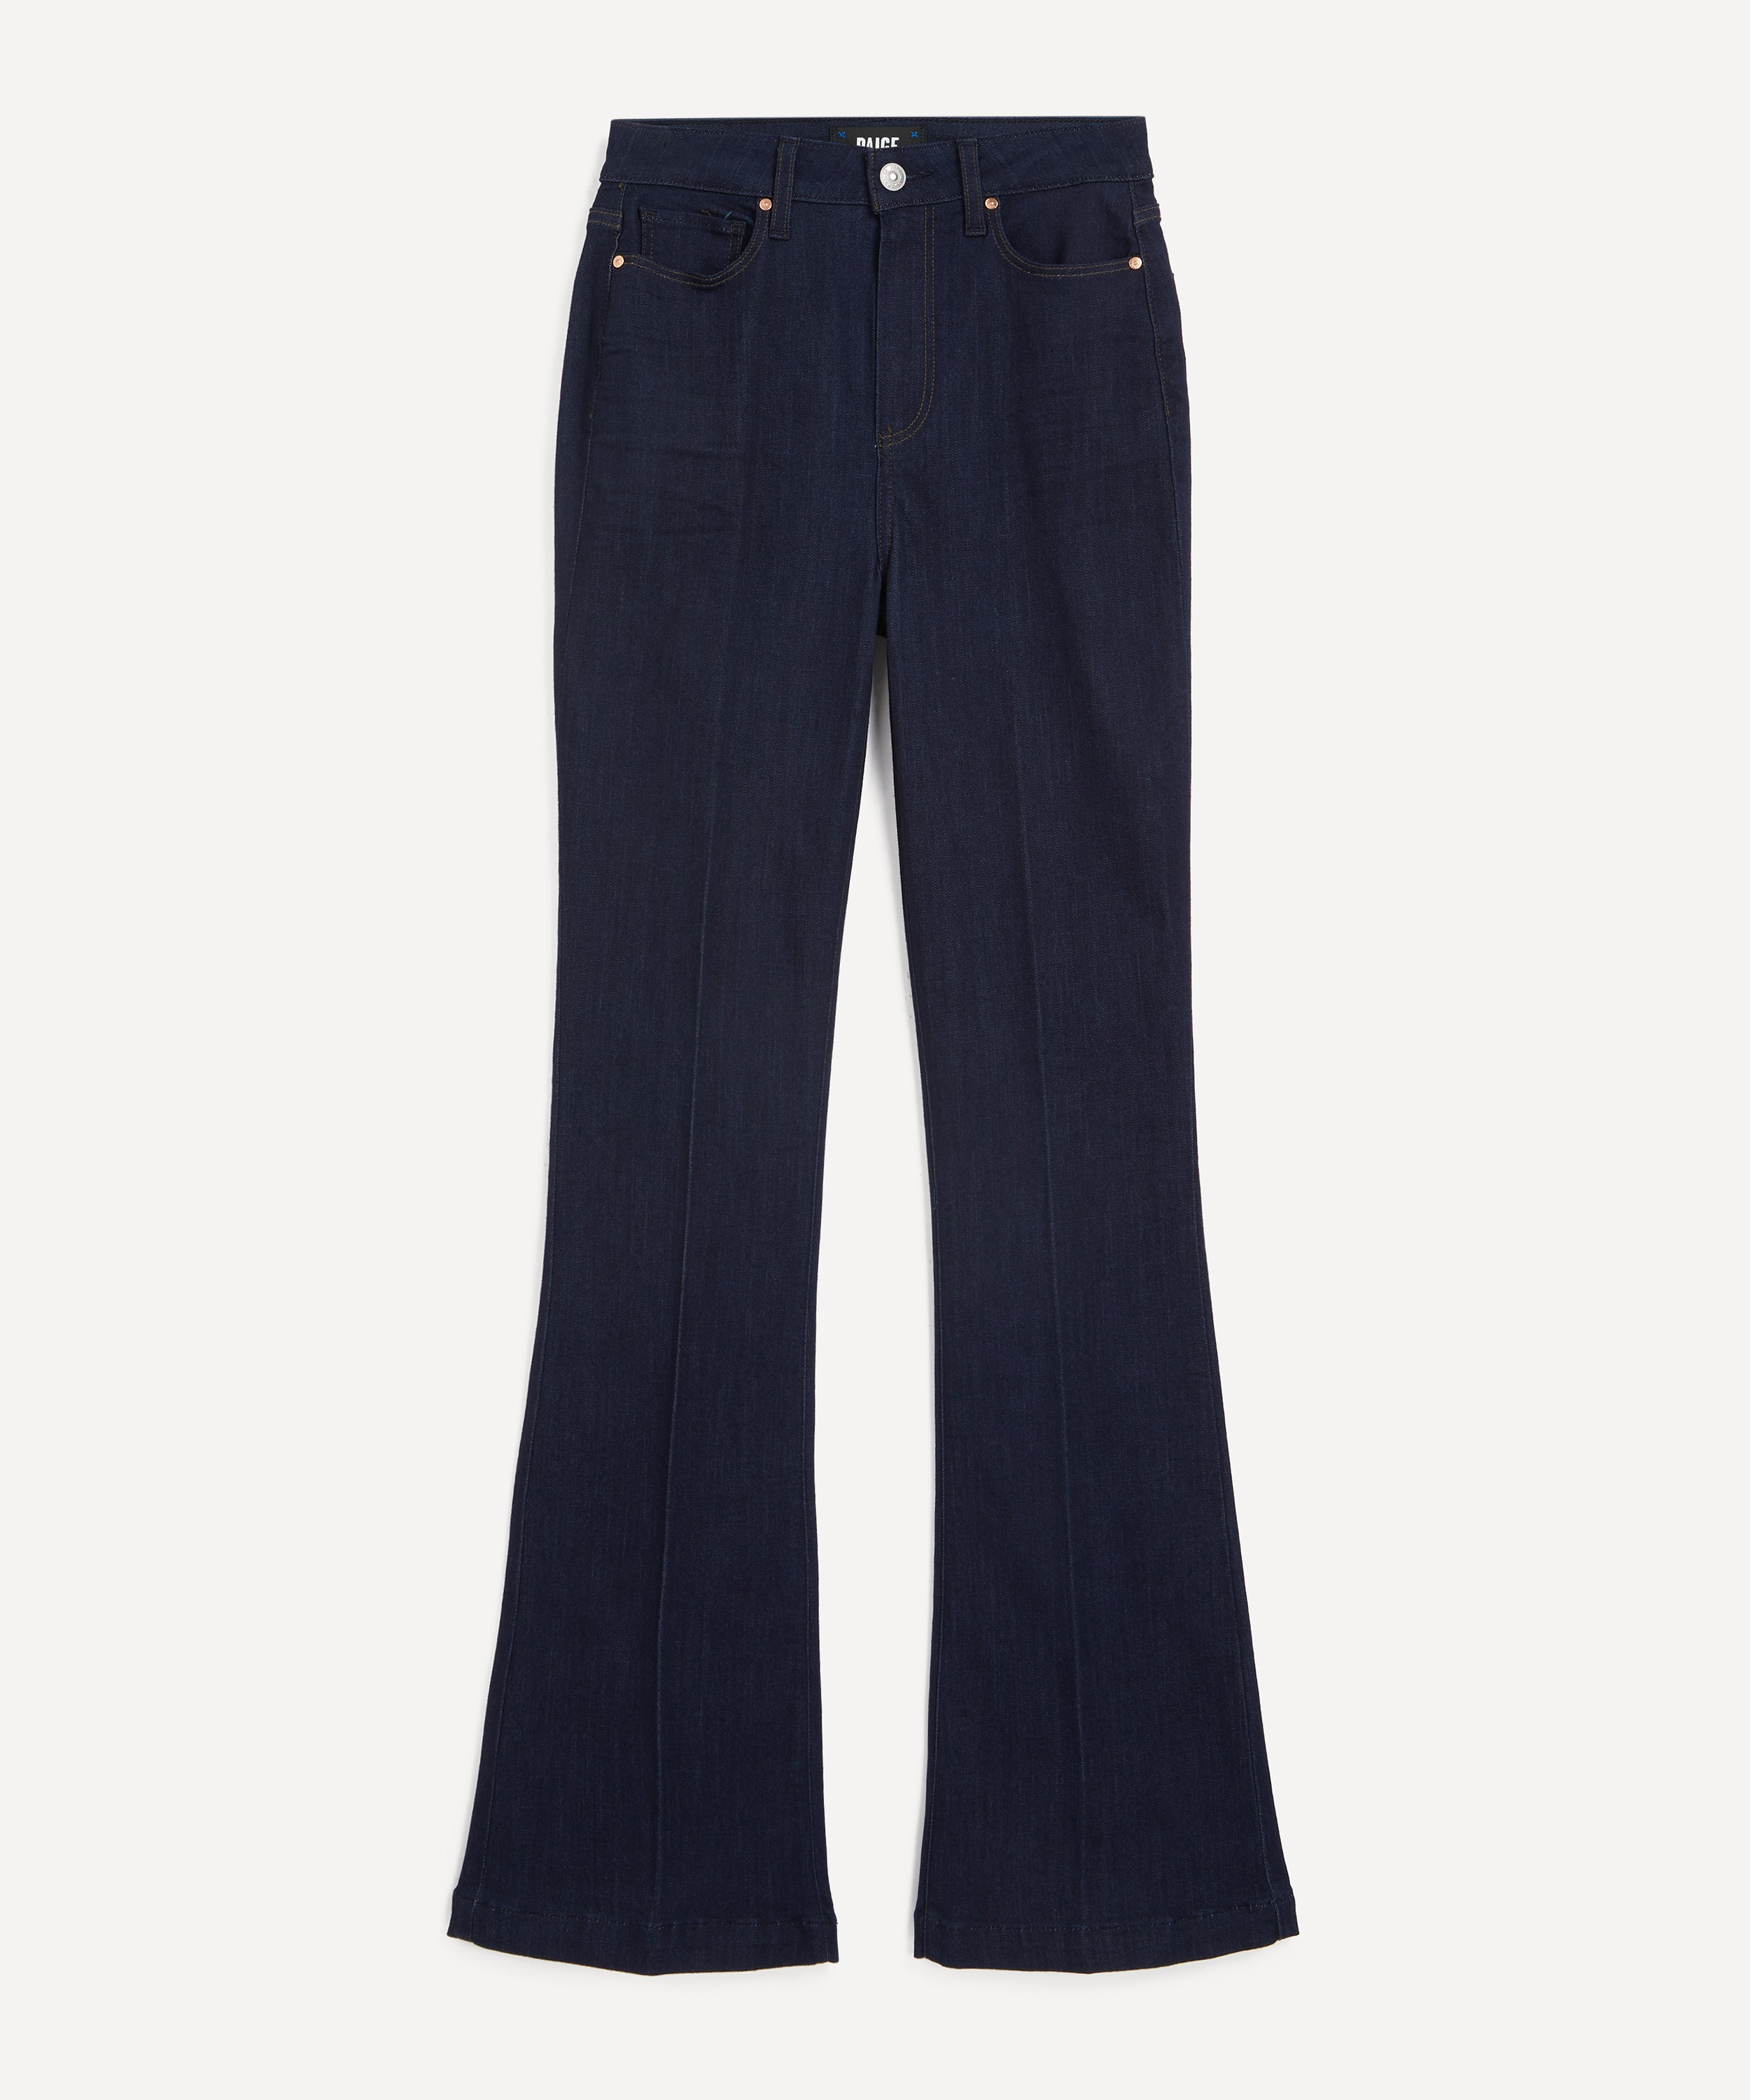 Paige - Iconic Flaunt Denim High Rise Flare Jeans image number null